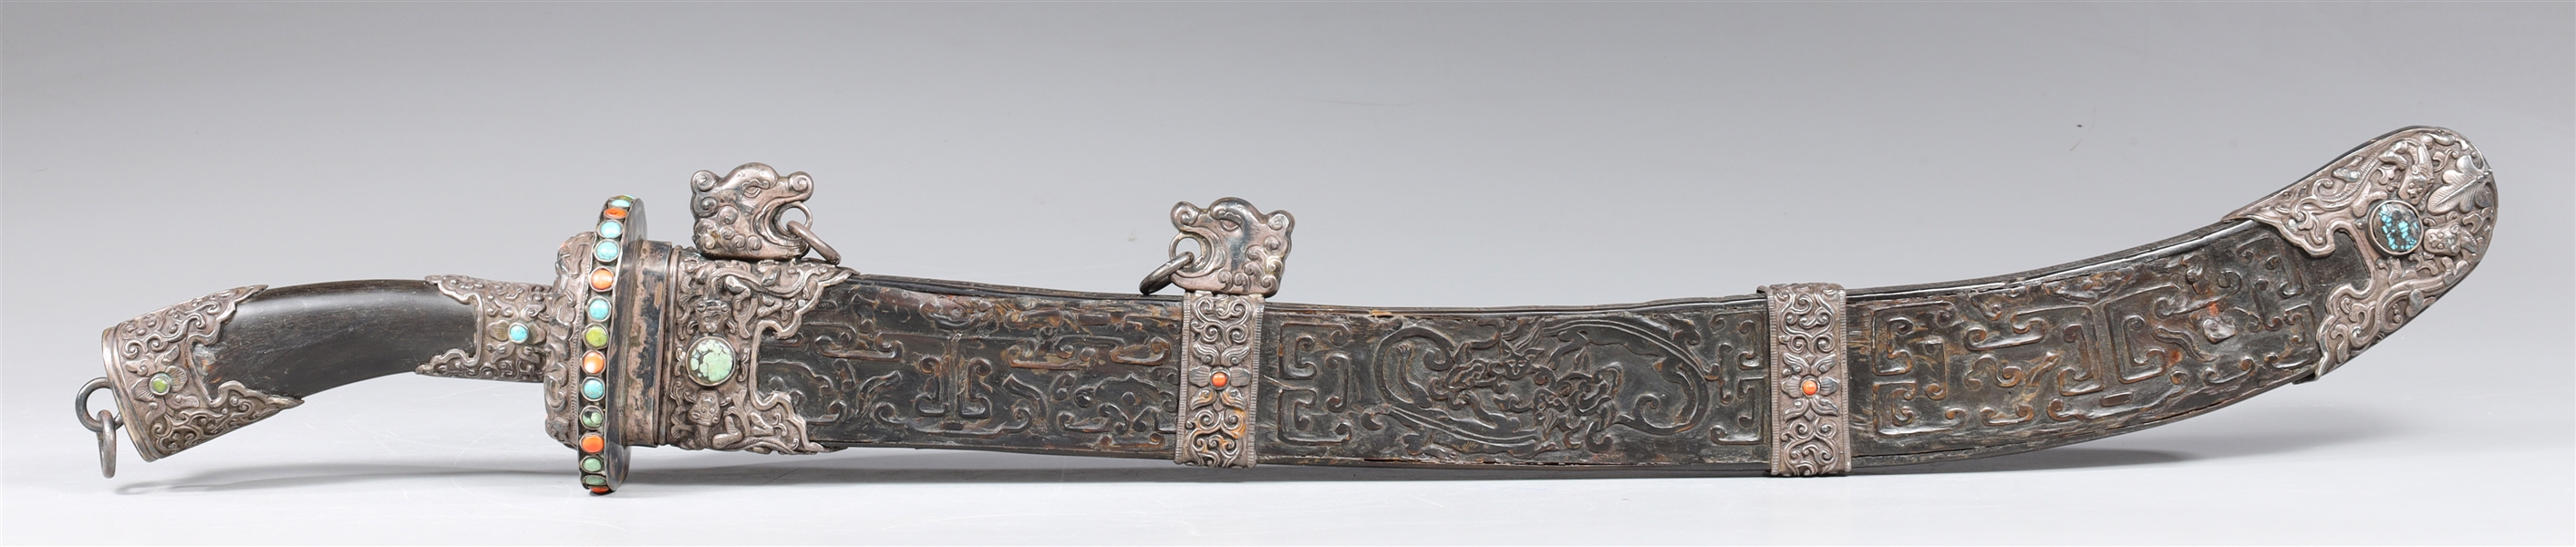 19th C Chinese sword mounted in 3047f2